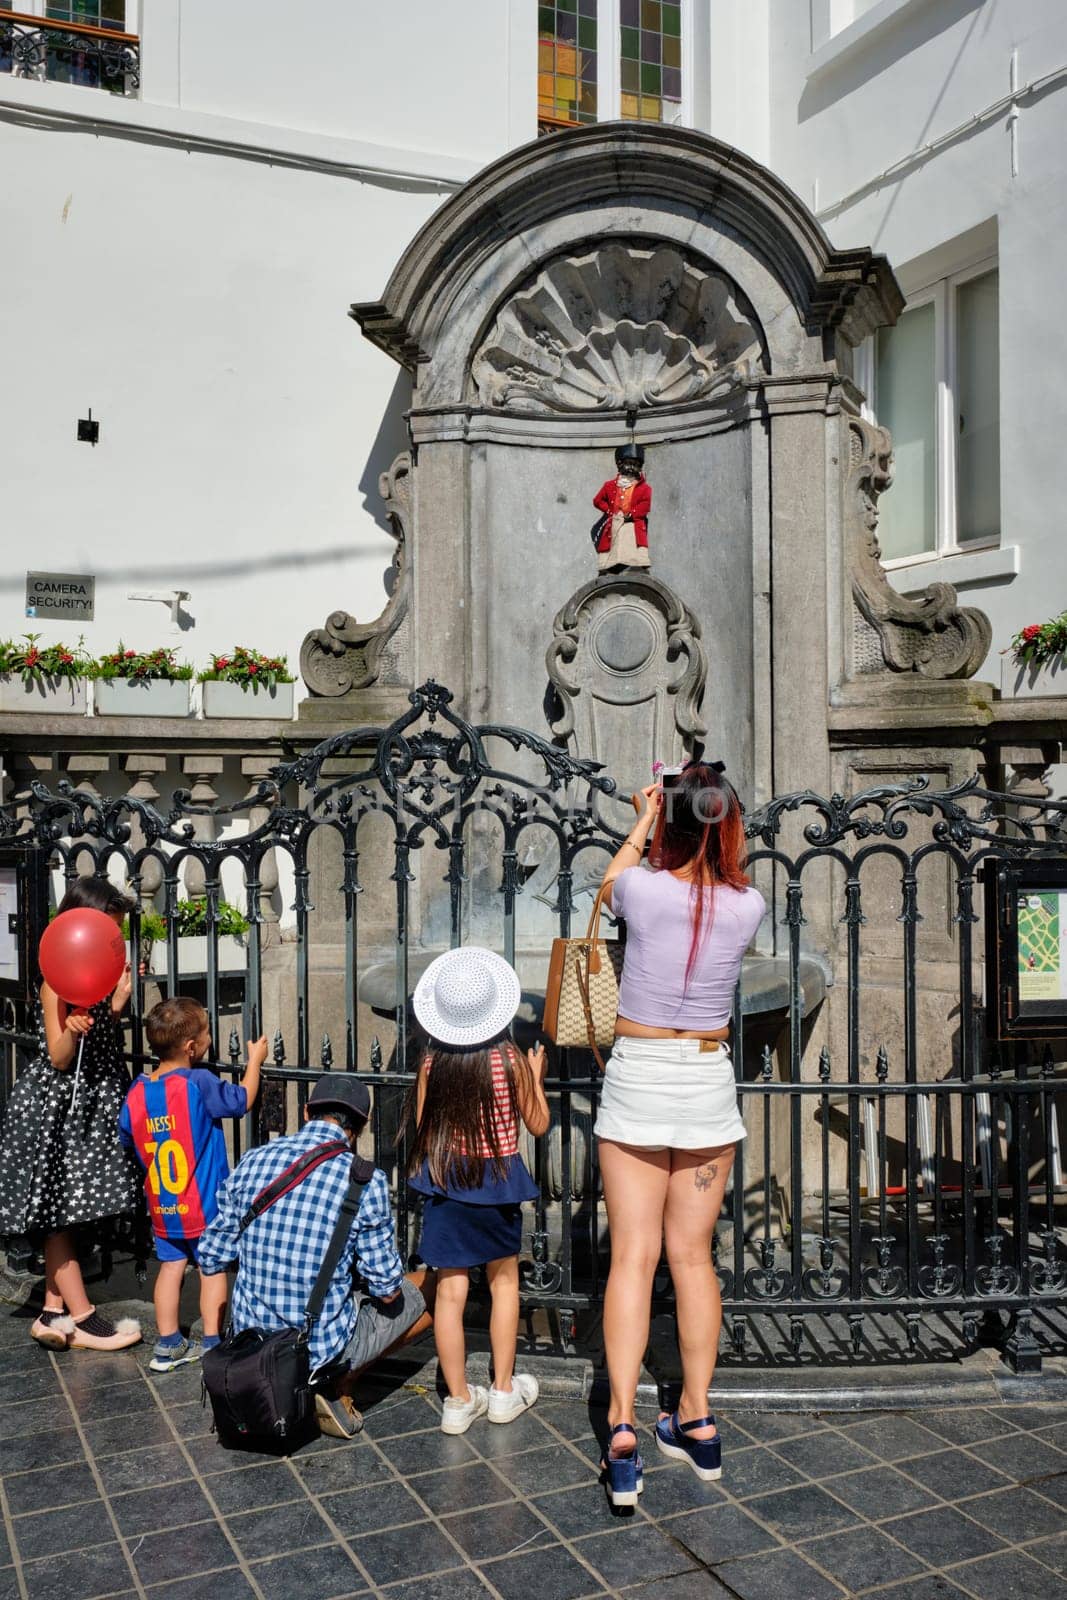 BRUSSELS, BELGIUM - MAY 31, 2018: Tourist taking pictures in front of famous tourist attraction of Brussels - dressed Manneken Pis statue fountain in Brussels. Bruxelles, Belgium